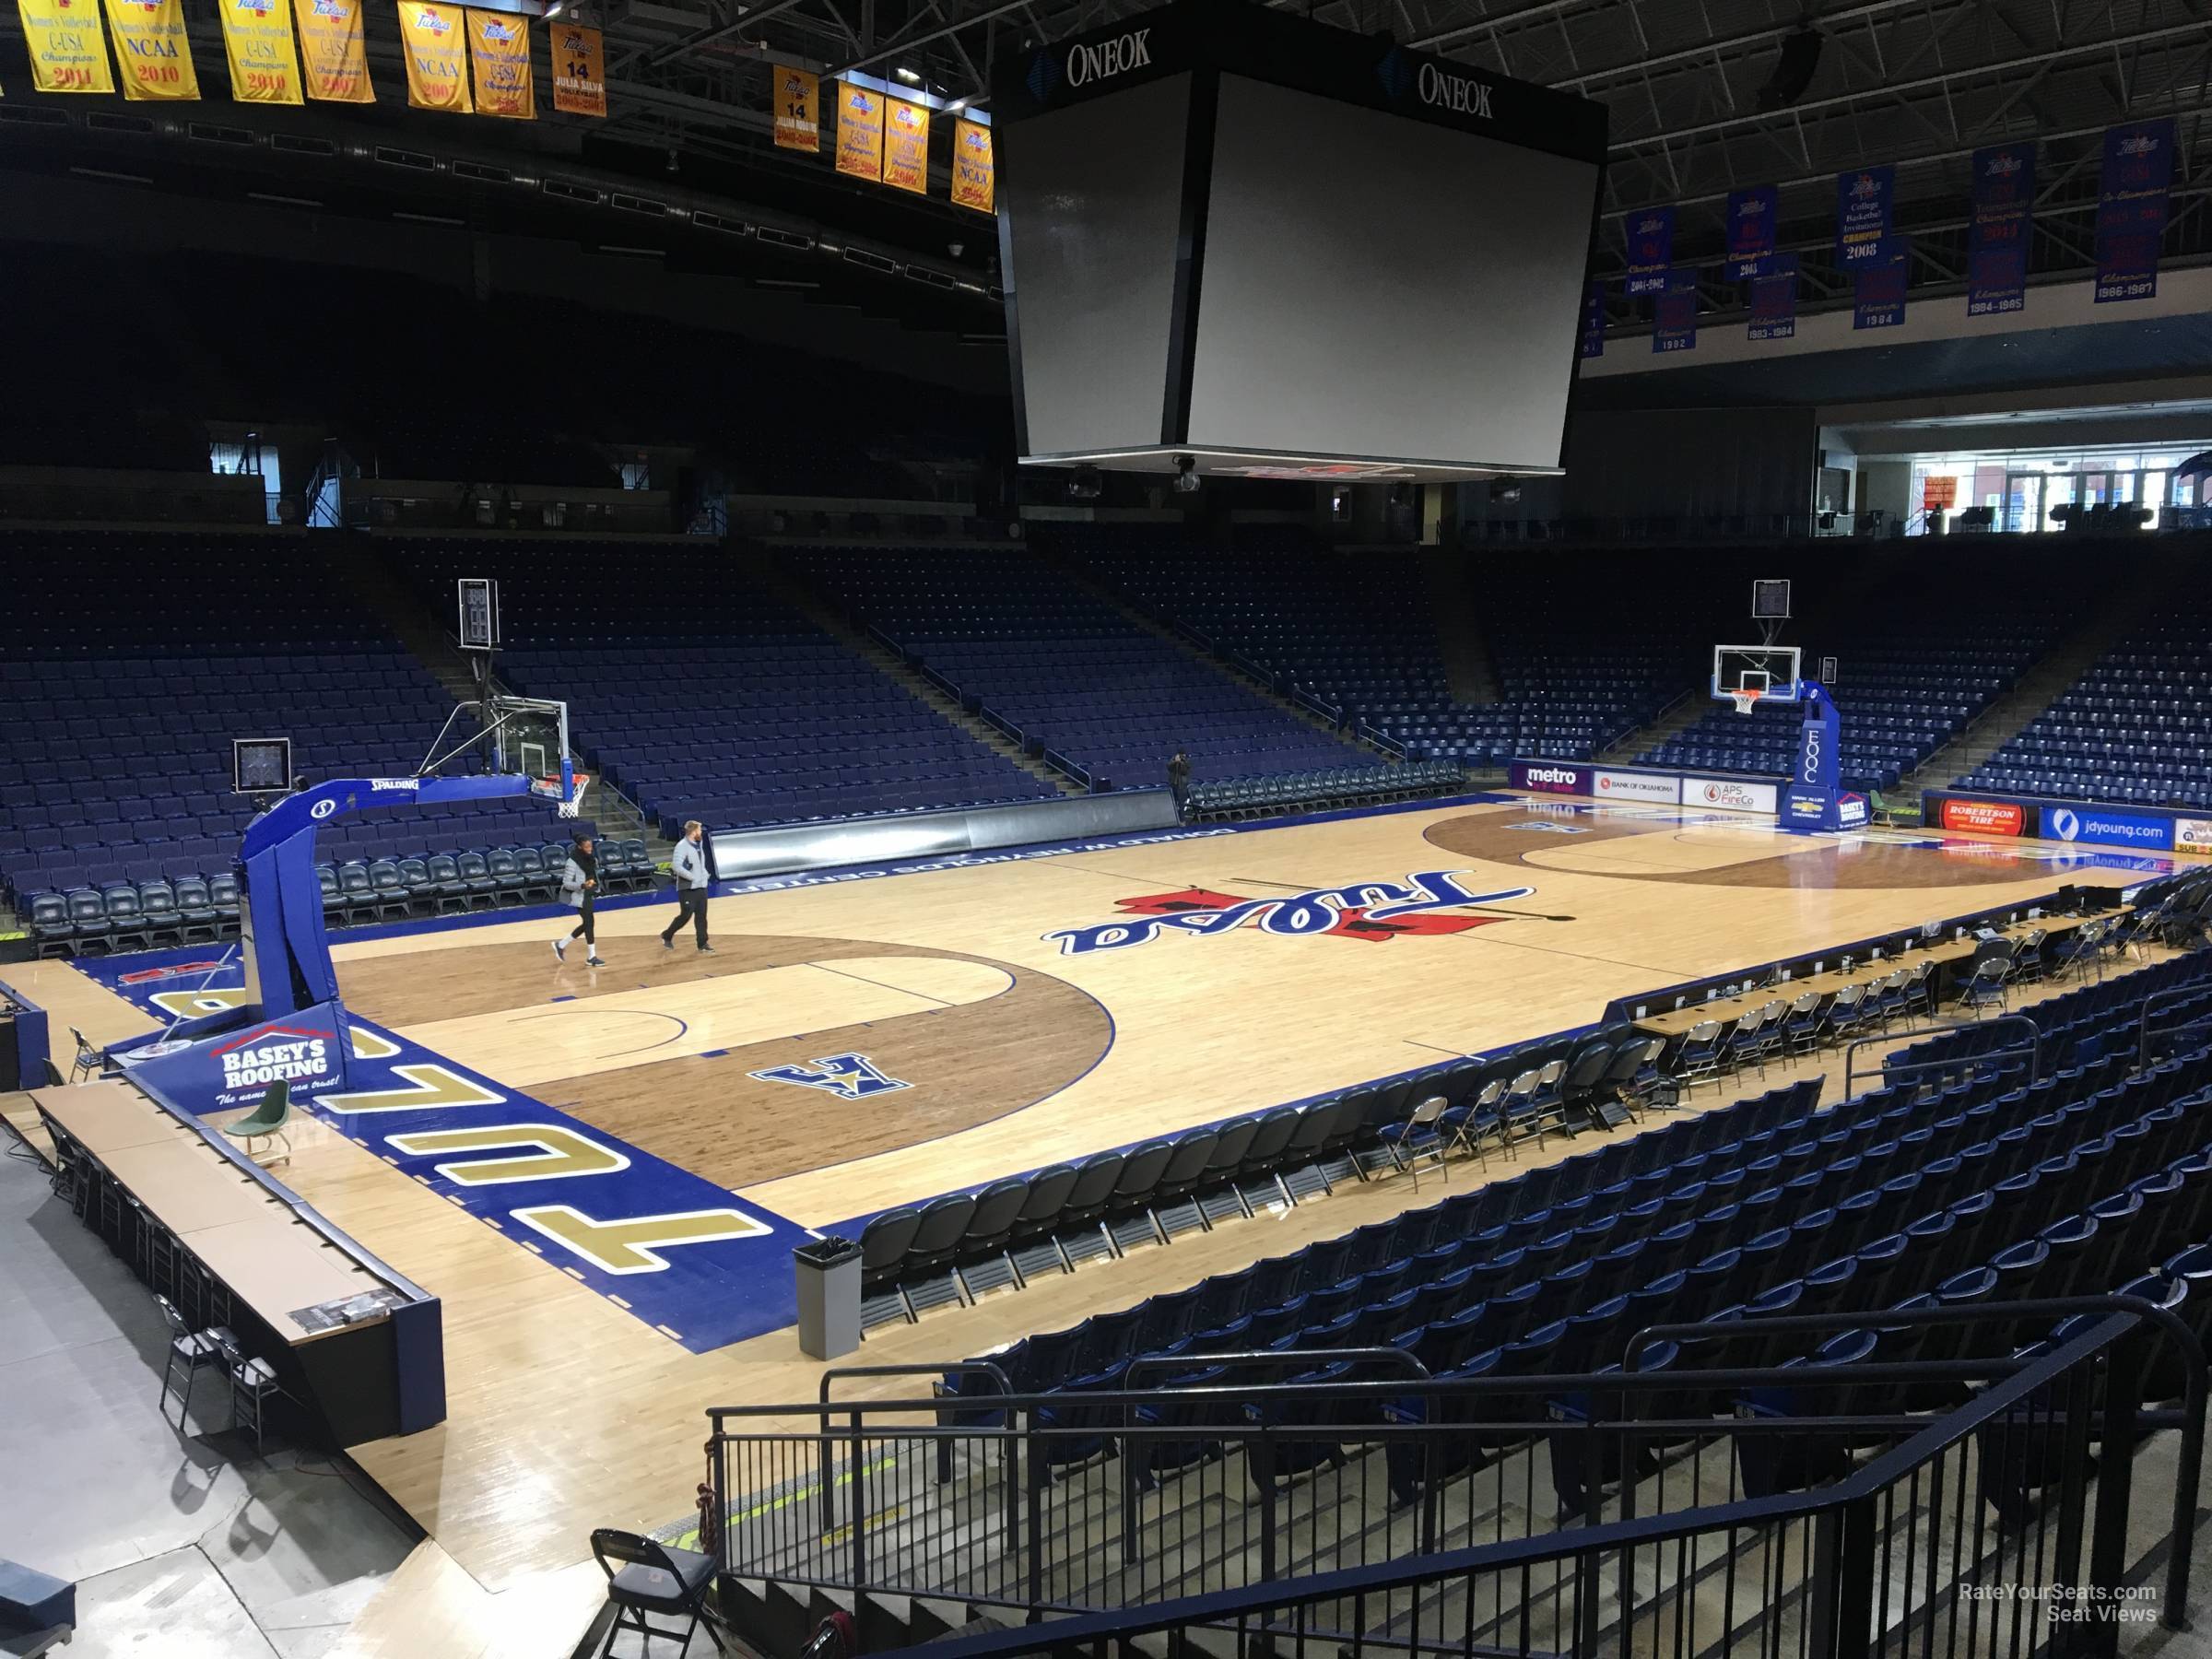 Section 107 at Reynolds Center - RateYourSeats.com